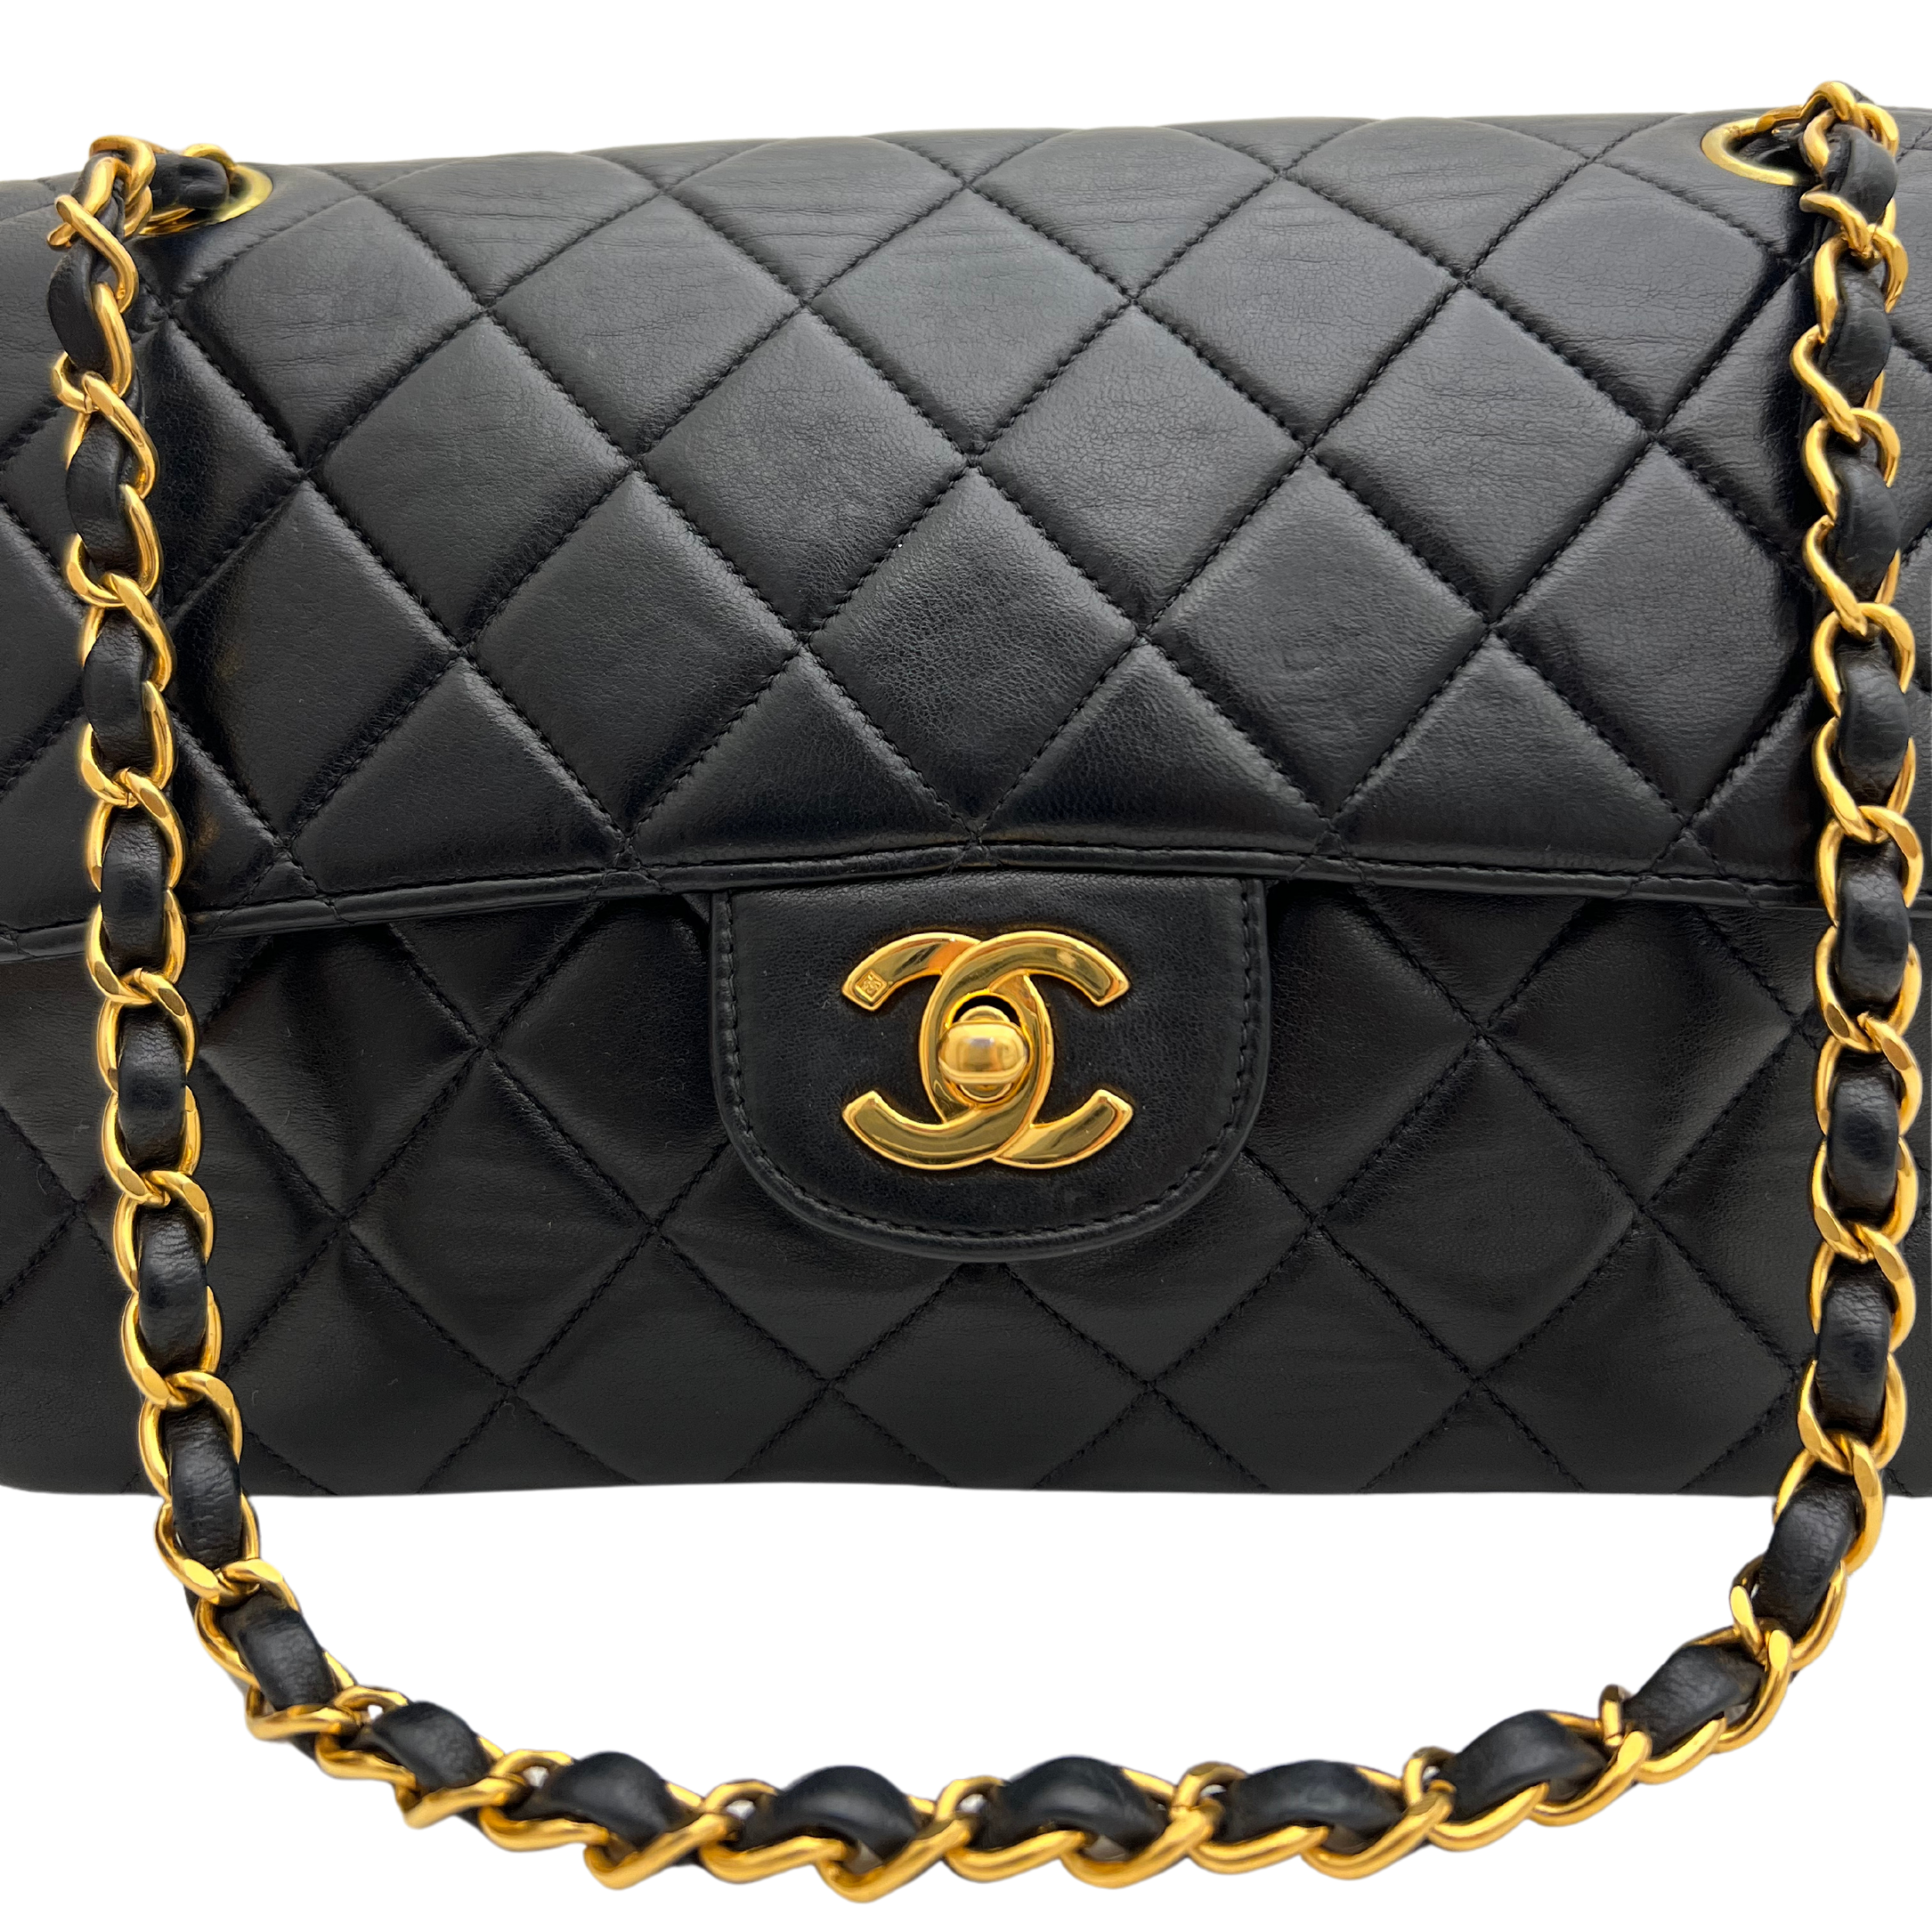 CLASSIC TIMELESS DOUBLE FACE MEDIUM - CHANEL Lola Collective